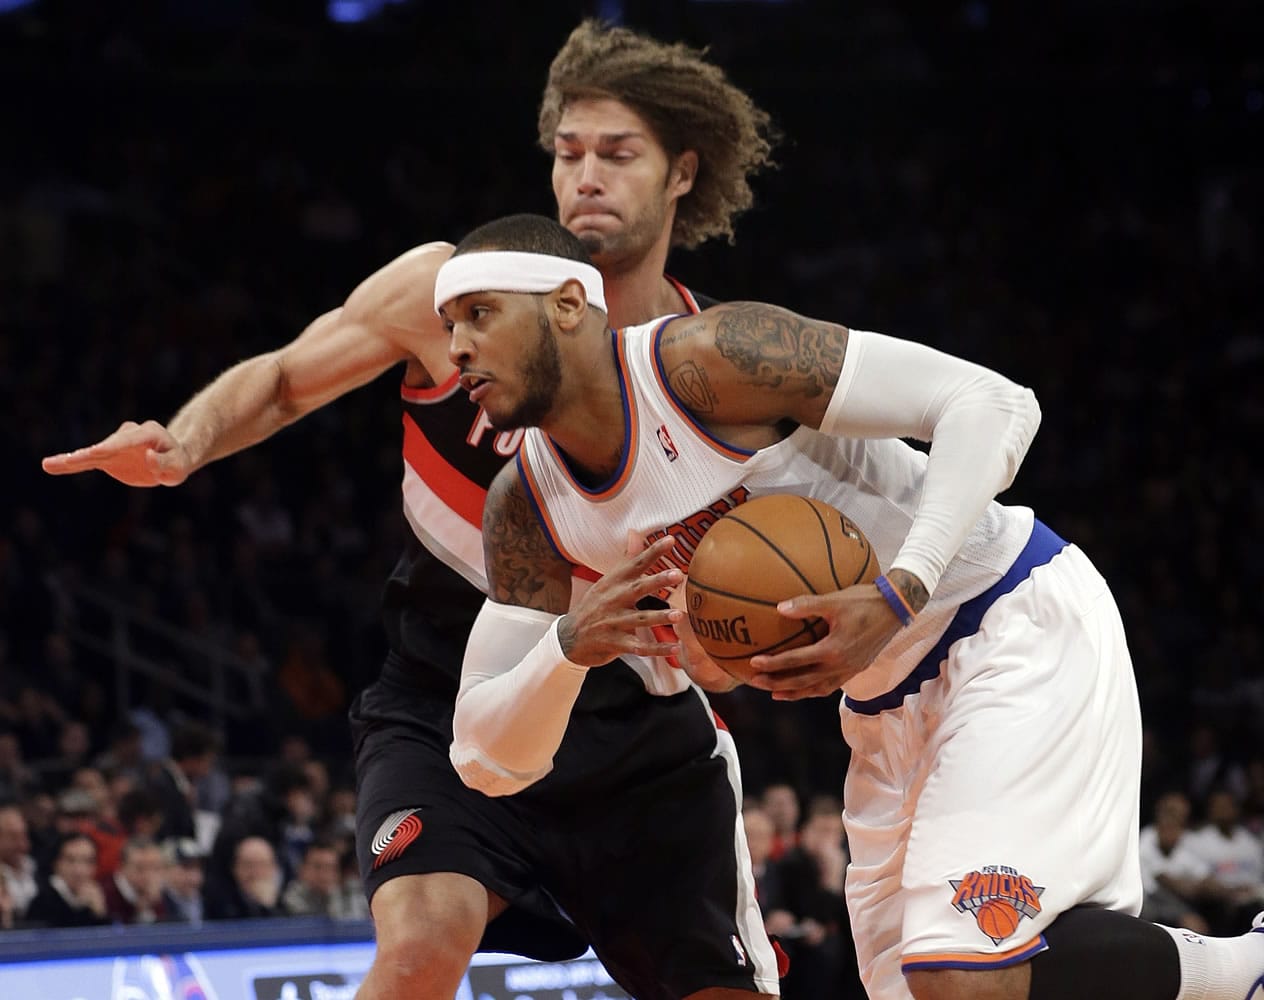 New York Knicks' Carmelo Anthony (7) drives past Portland Trail Blazers' Robin Lopez (42) during the first half of an NBA basketball game, Wednesday, Feb. 5, 2014, in New York.